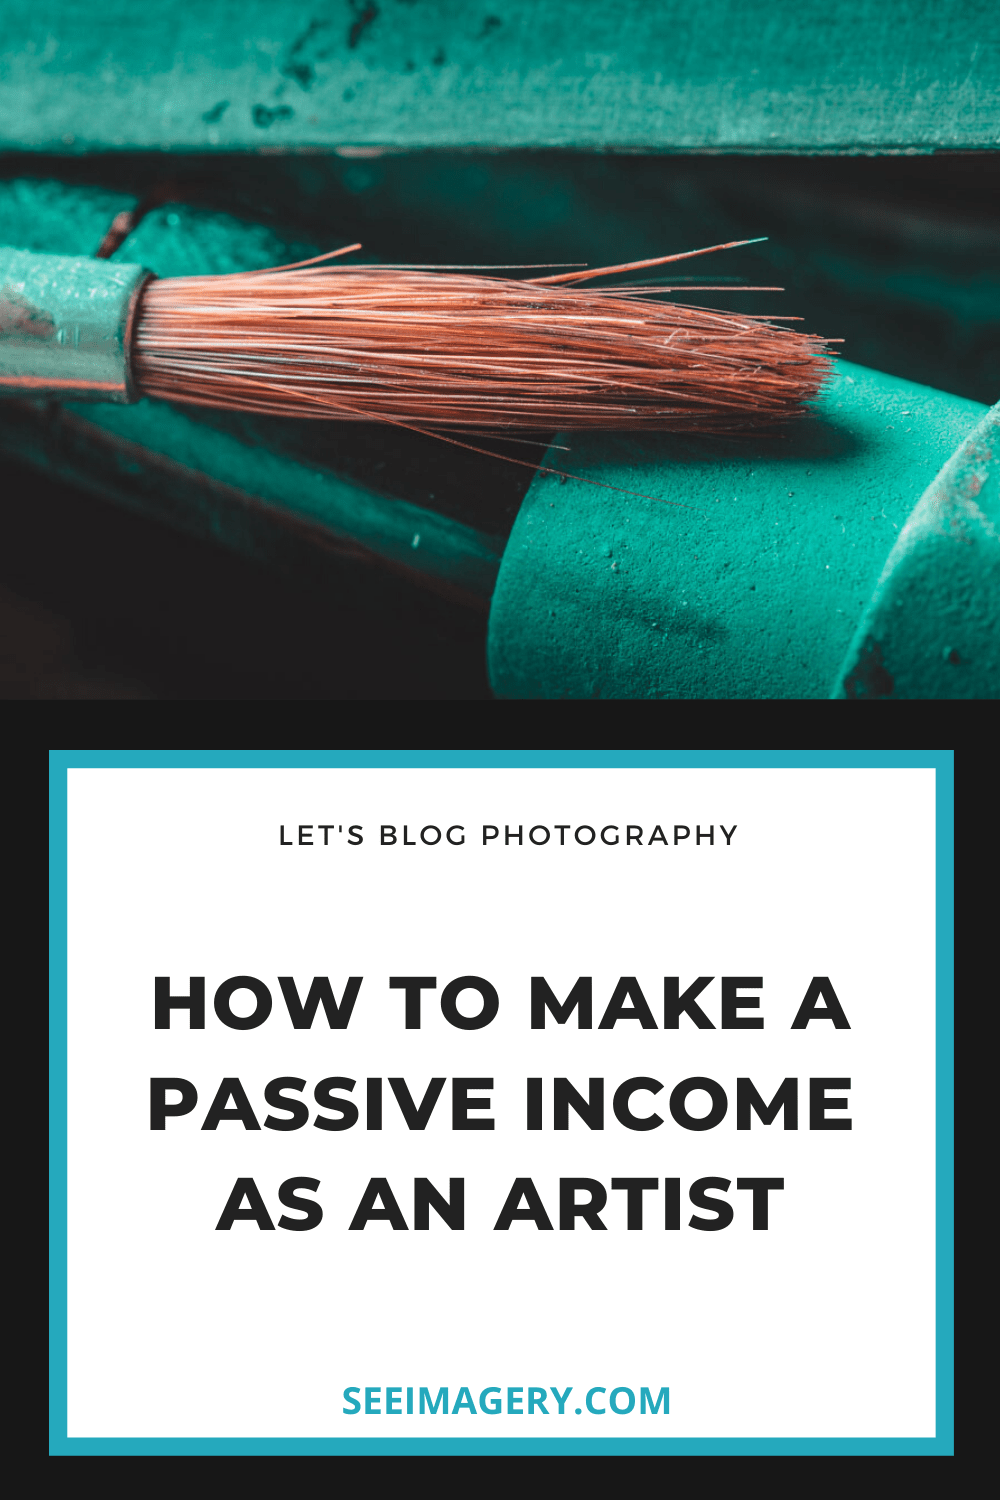 How to Make a passive income as an artist